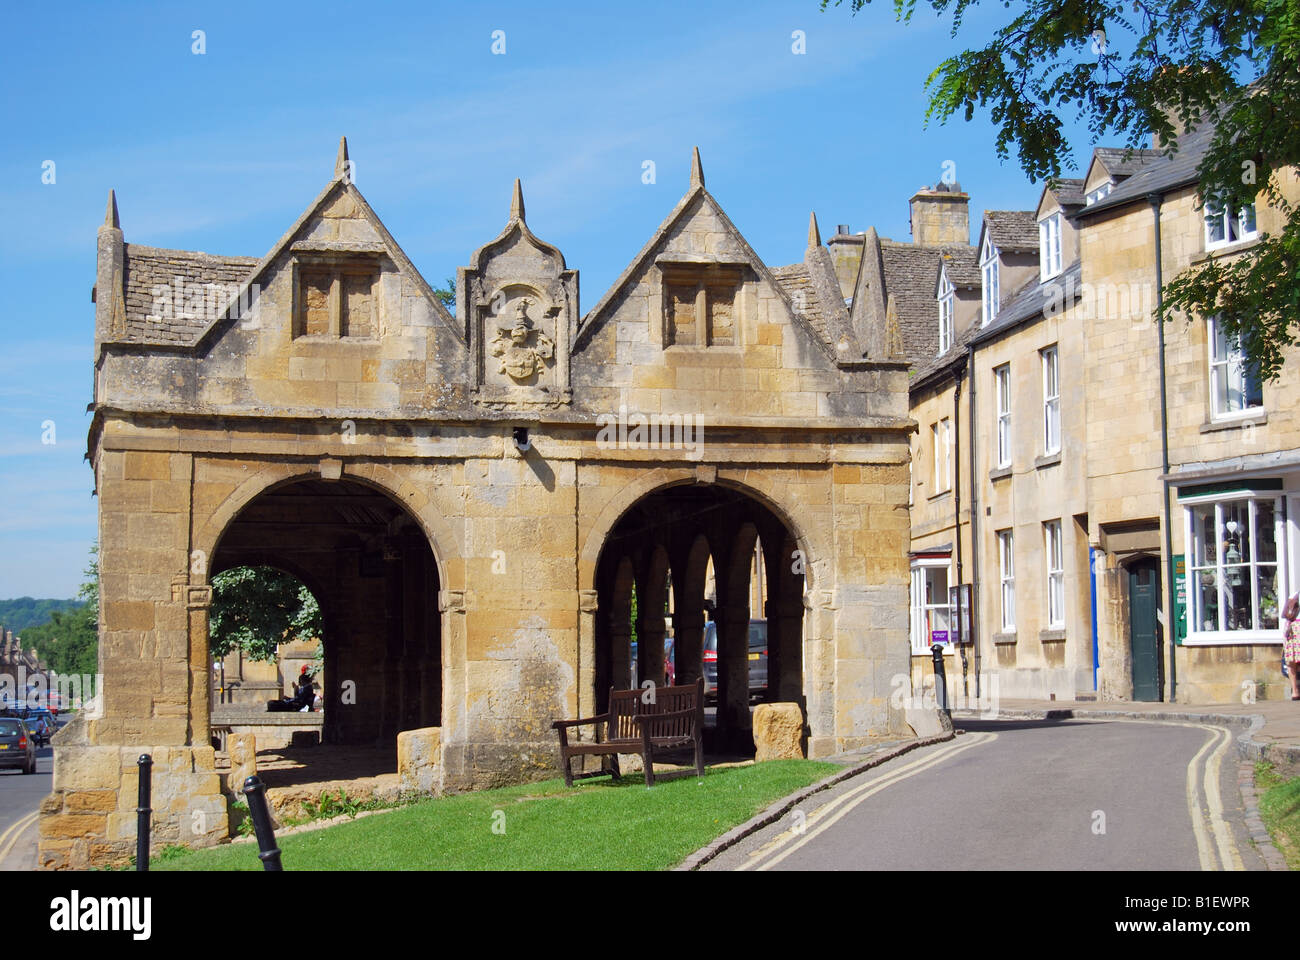 Marché médiéval Hall, High Street, Chipping Campden, Cotswolds, Gloucestershire, Angleterre, Royaume-Uni Banque D'Images